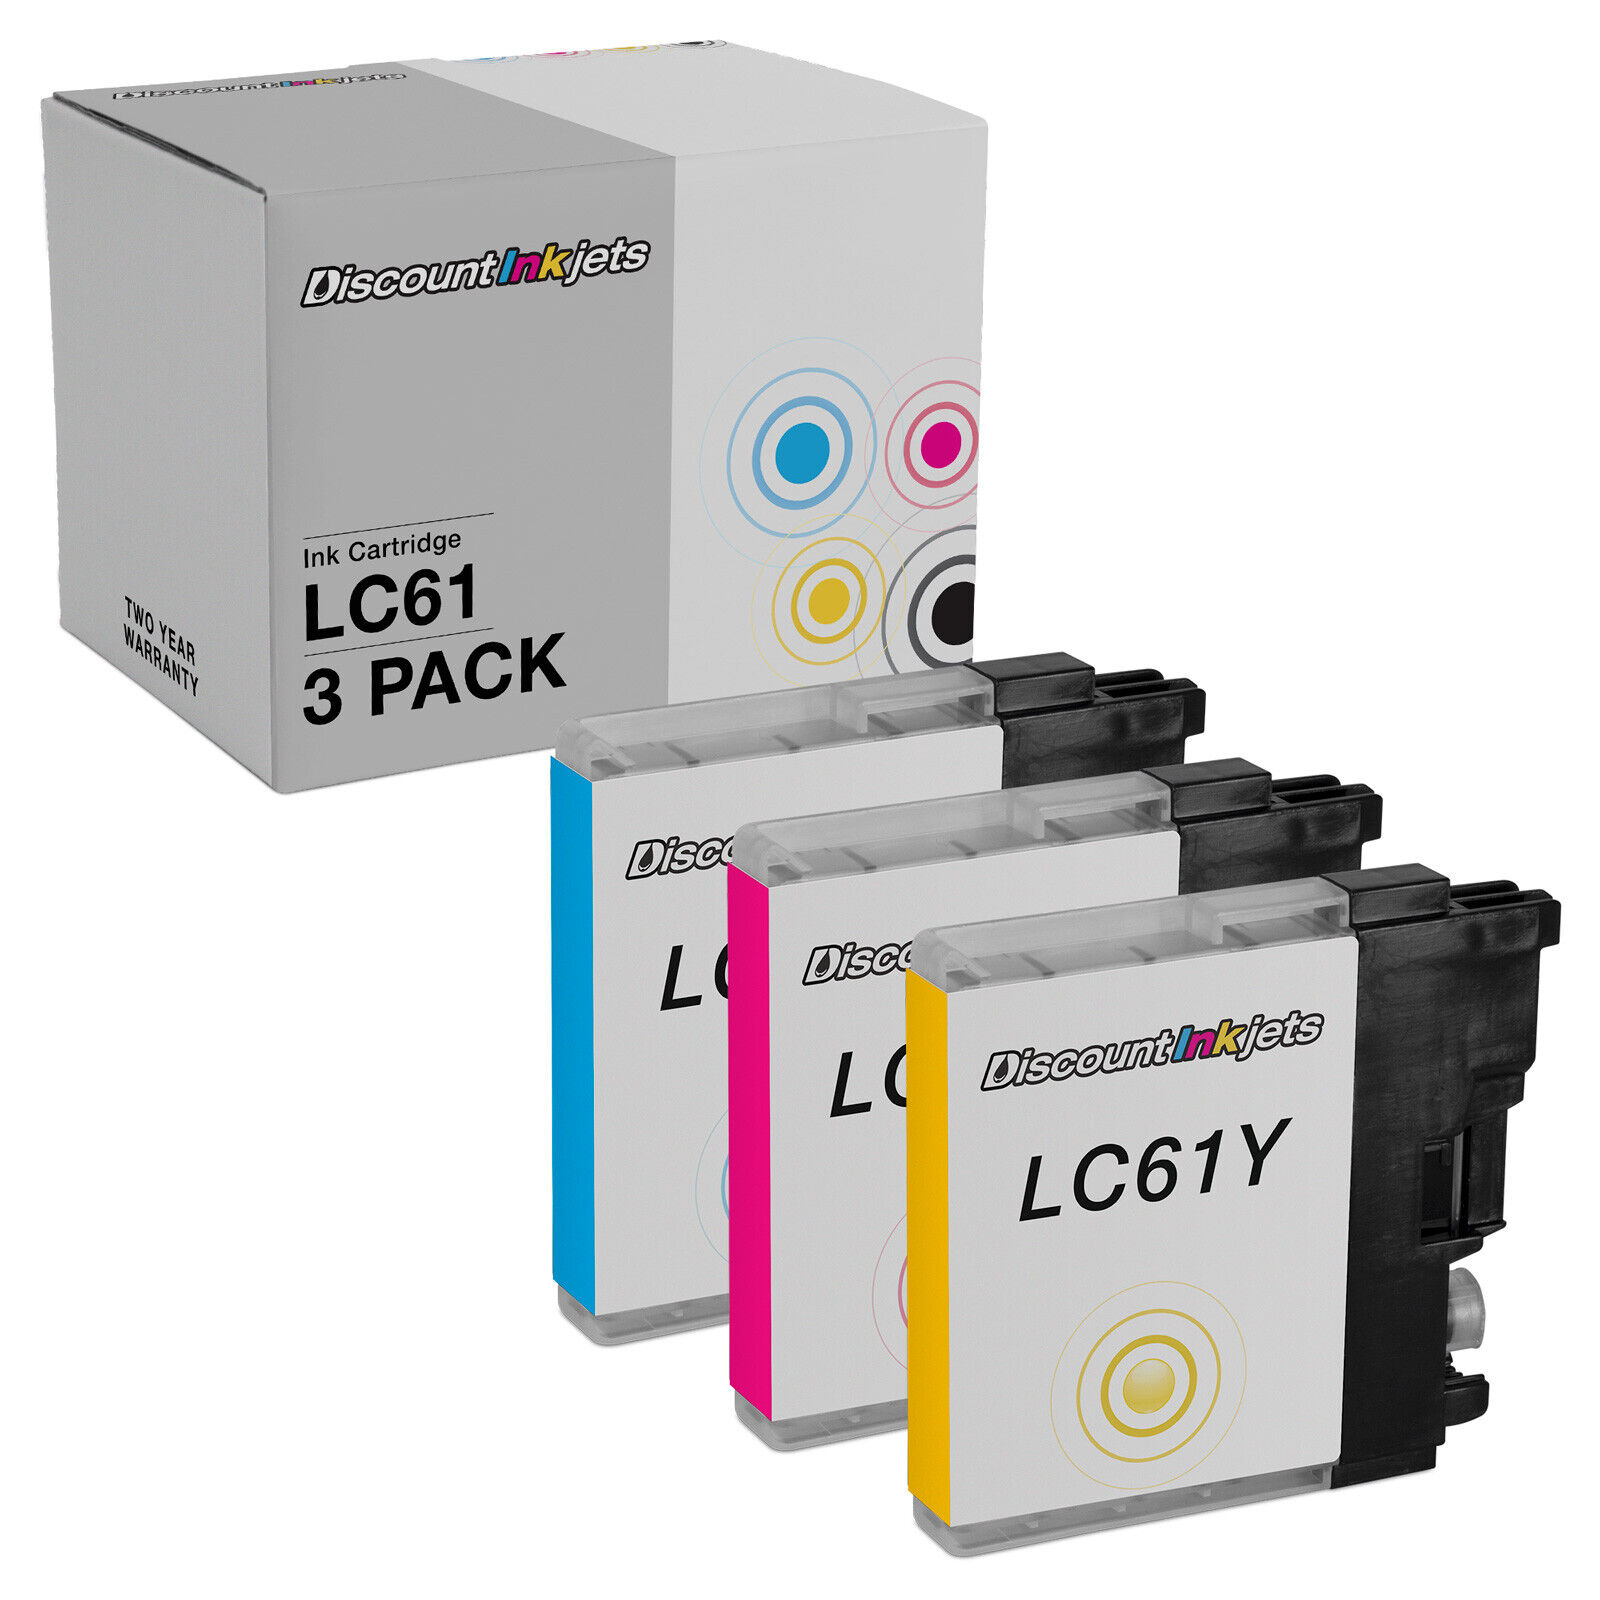 3PK COLOR for Brother LC61 Inkjet Cartridge MFC-290C MFC-490CW MFC-5490 MFC-790C